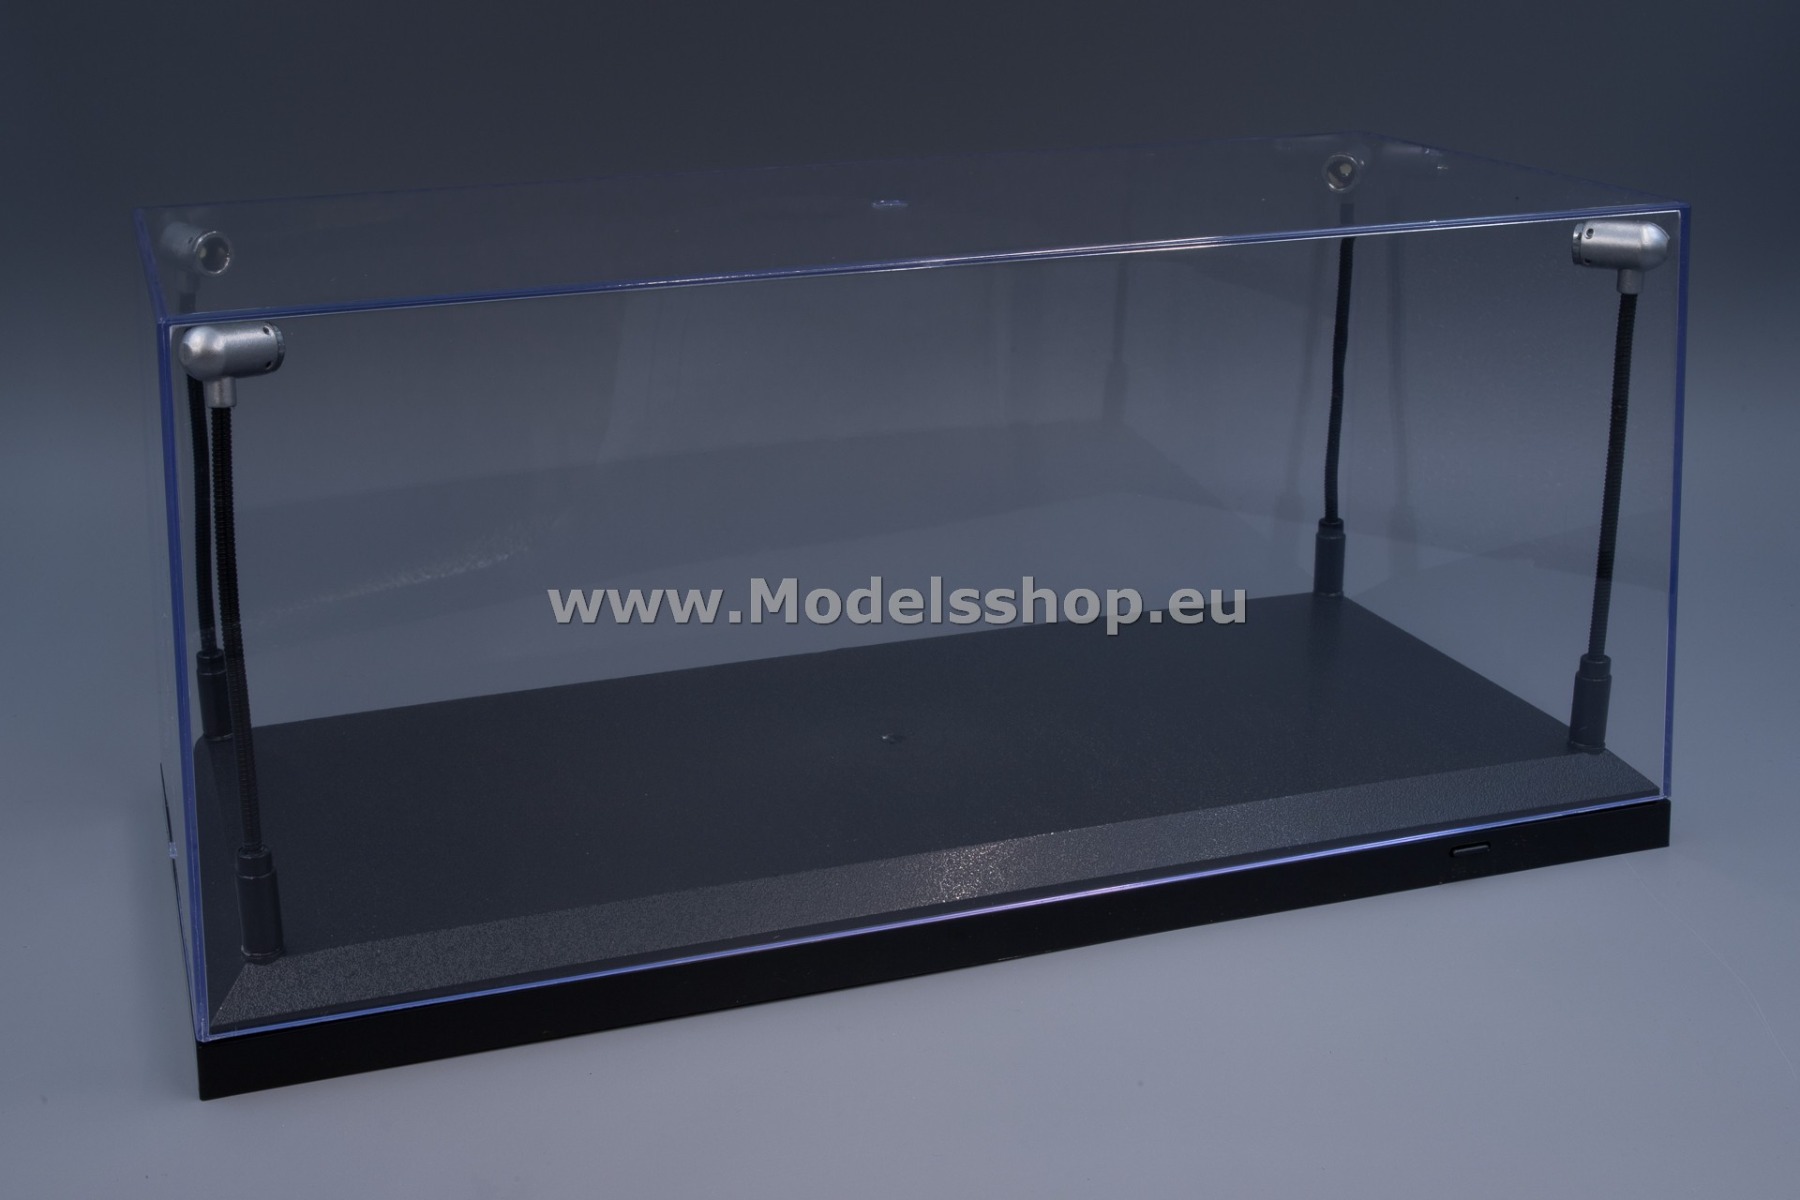 Led show case for 1:18 model (Dimensions: L:35,5cm x W:15,6cm x H:16cm). Includes 4x ultra bright LED, adjustable lights (model not included!)